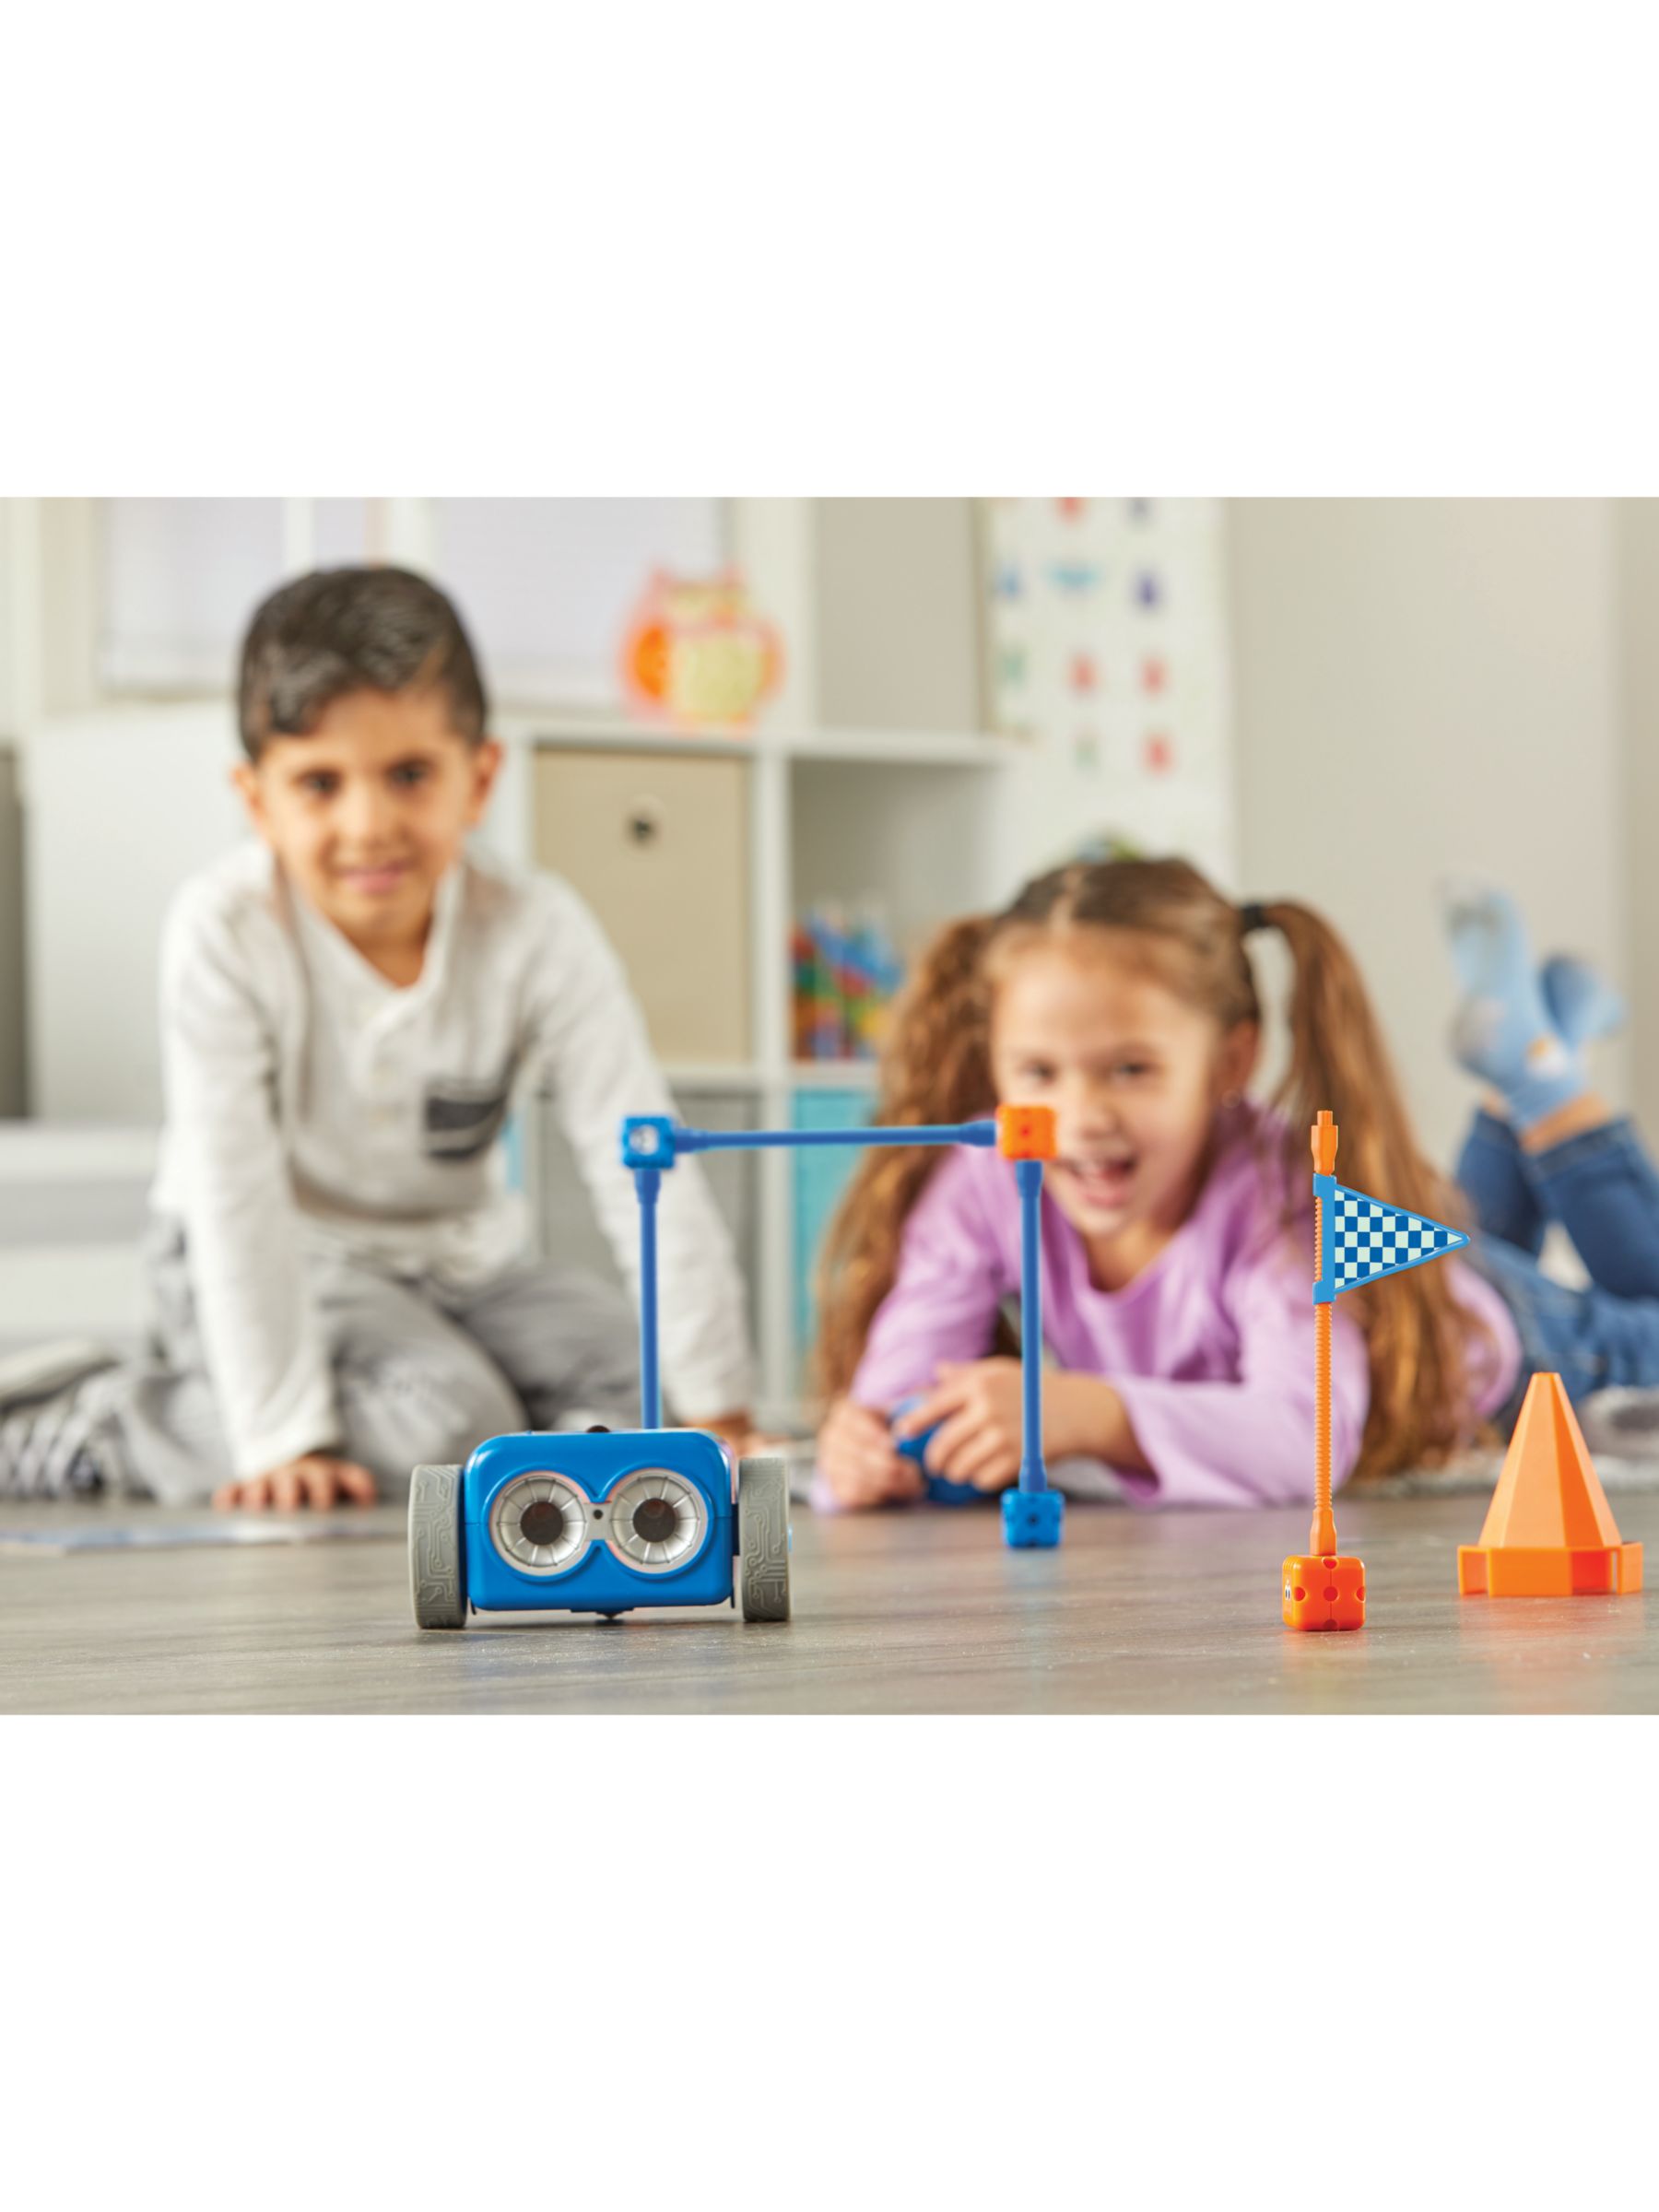  Learning Resources Botley The Coding Robot 2.0